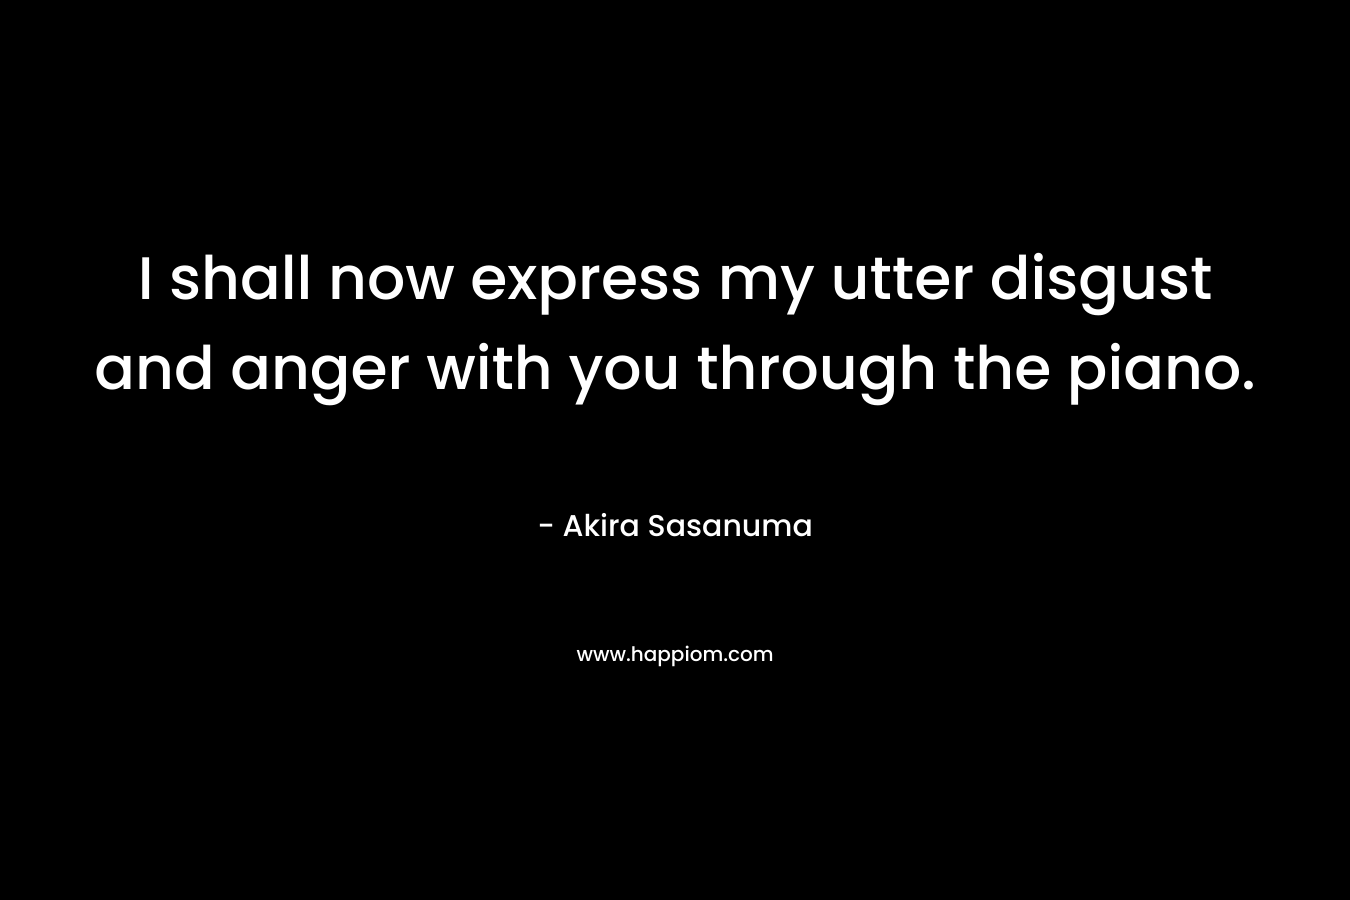 I shall now express my utter disgust and anger with you through the piano. – Akira Sasanuma